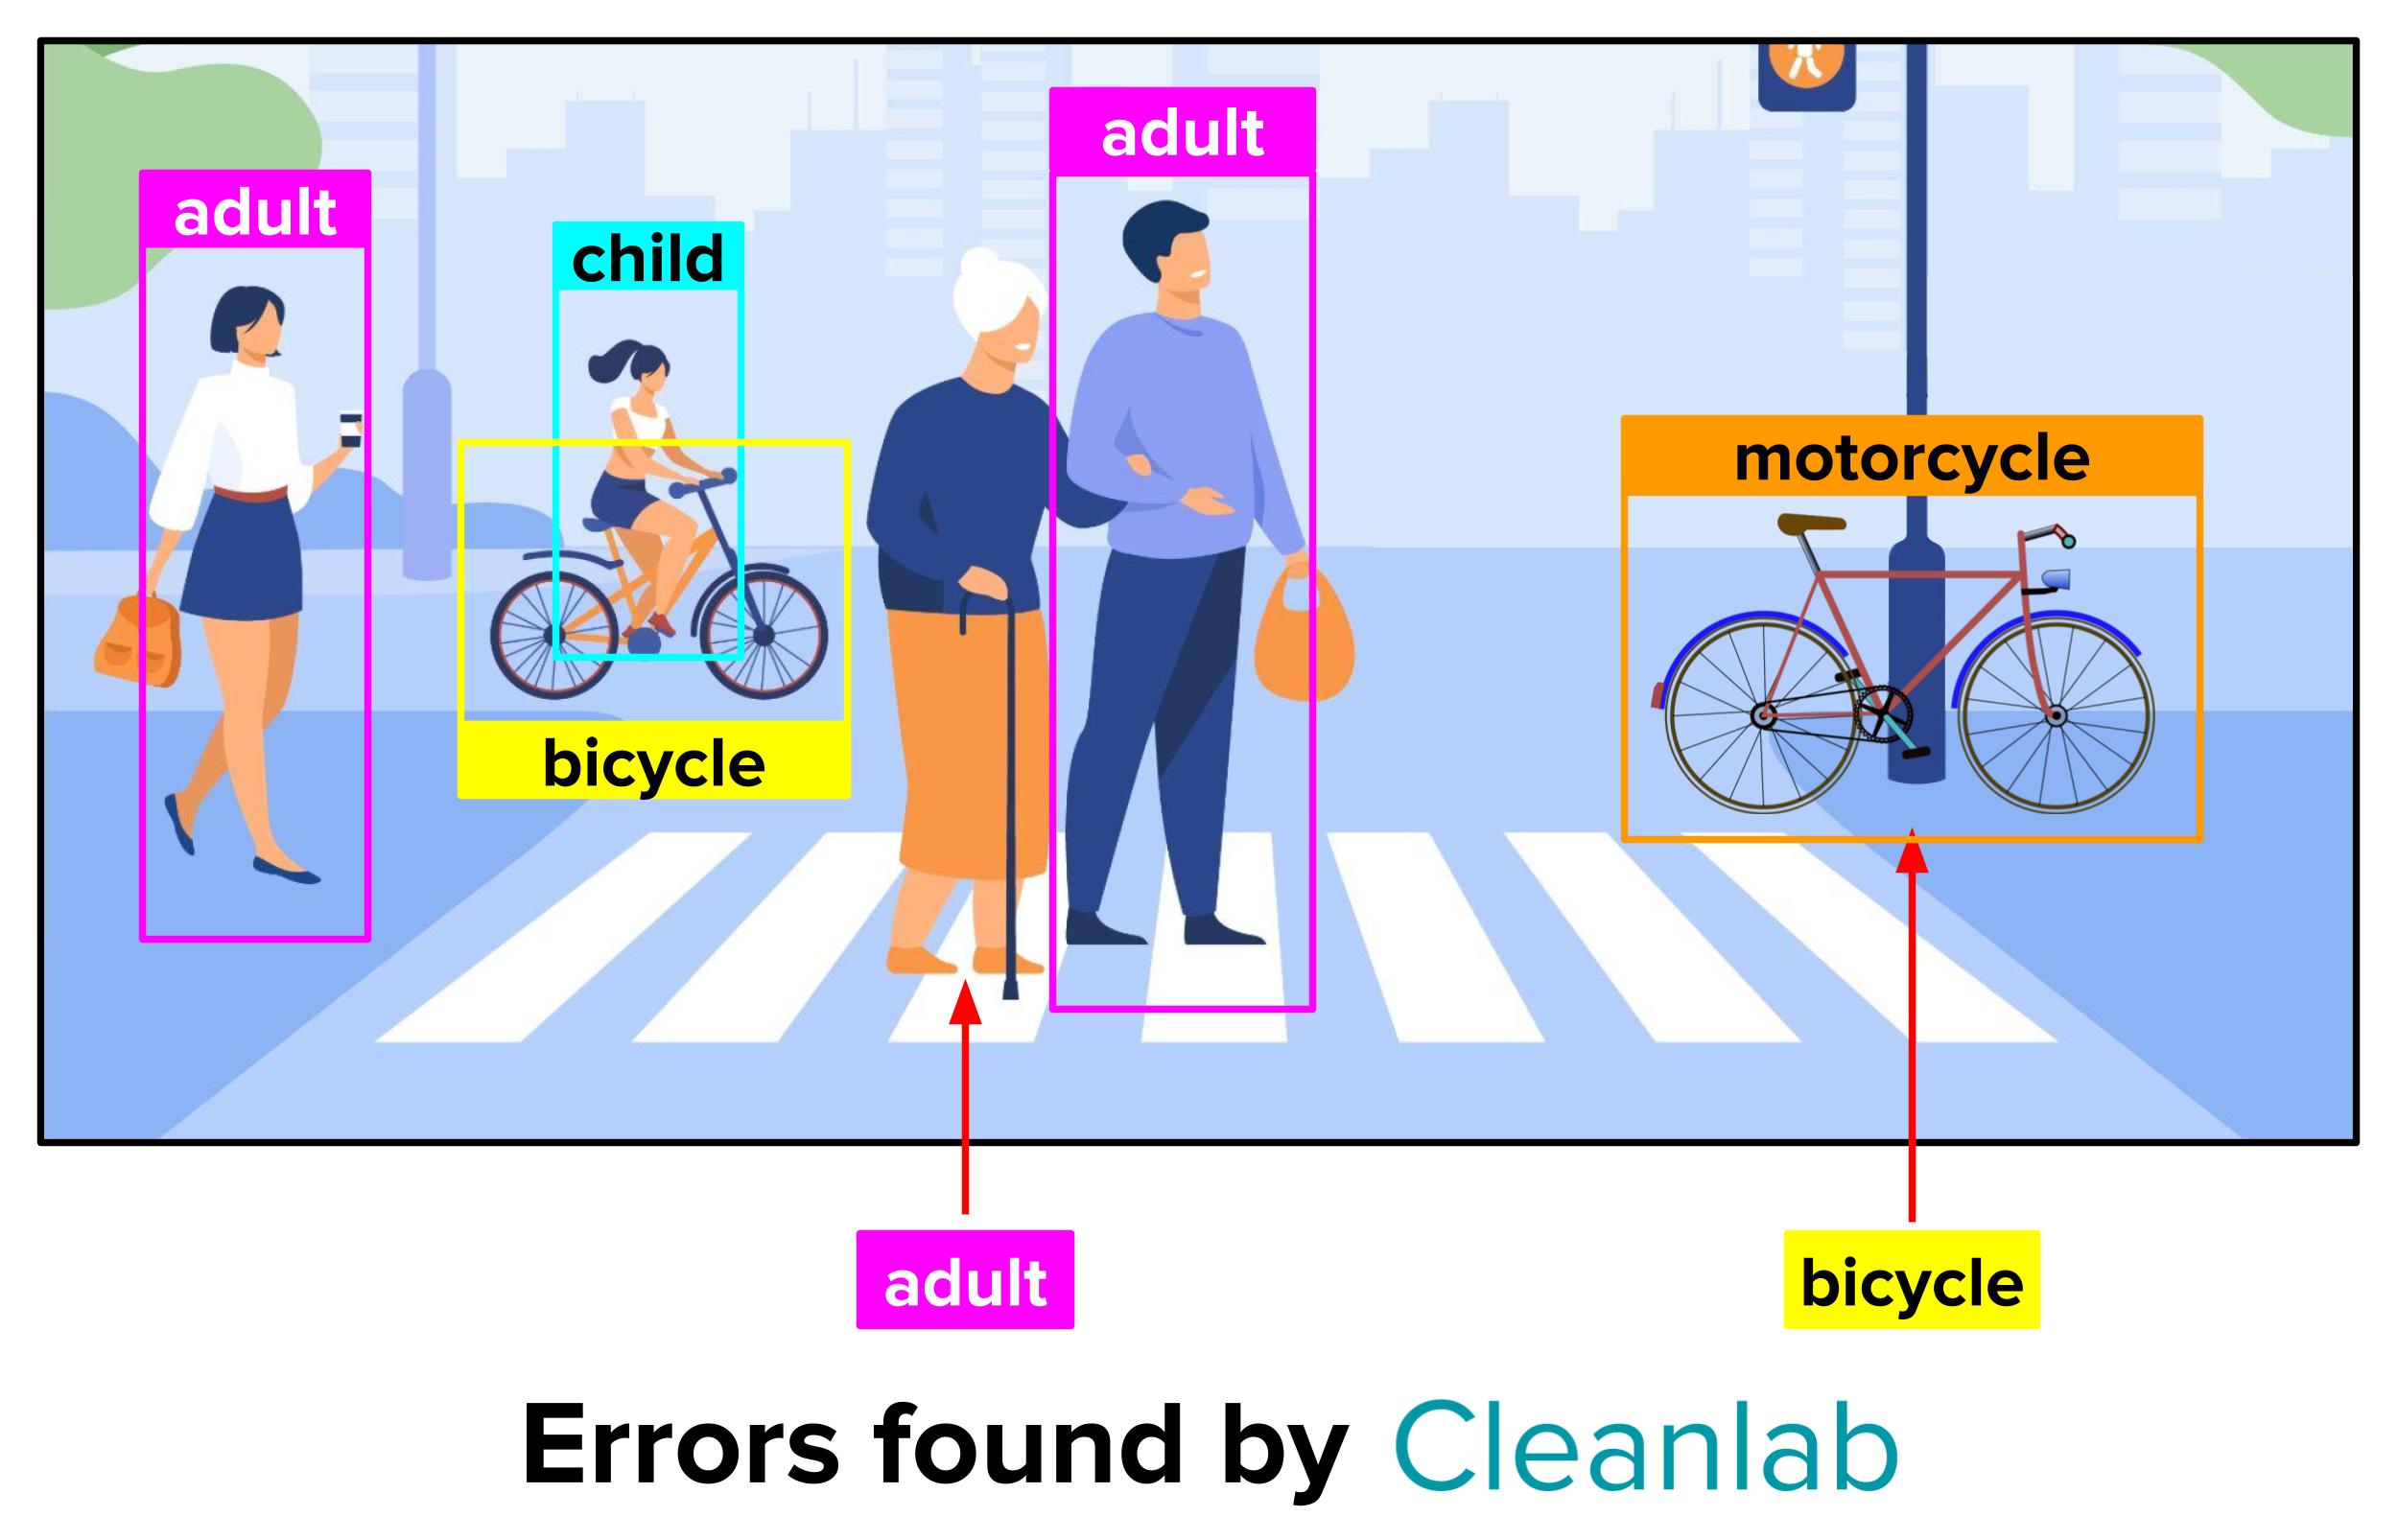 Errors found in object detection example.